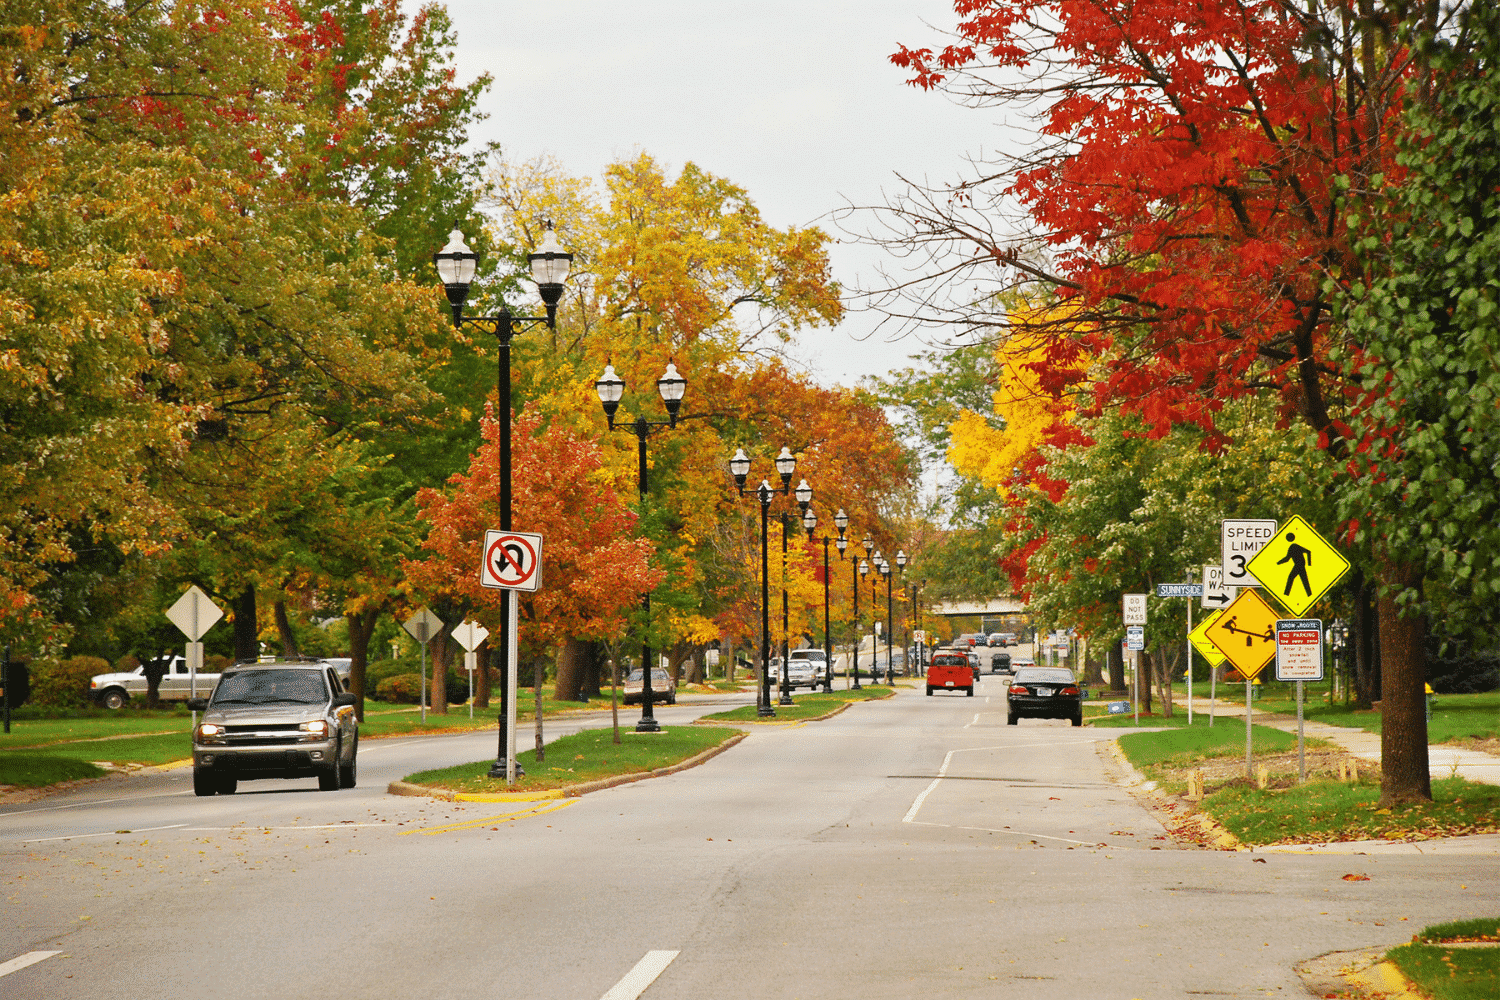 midwest neighborhood street in autumn with cars and street signs